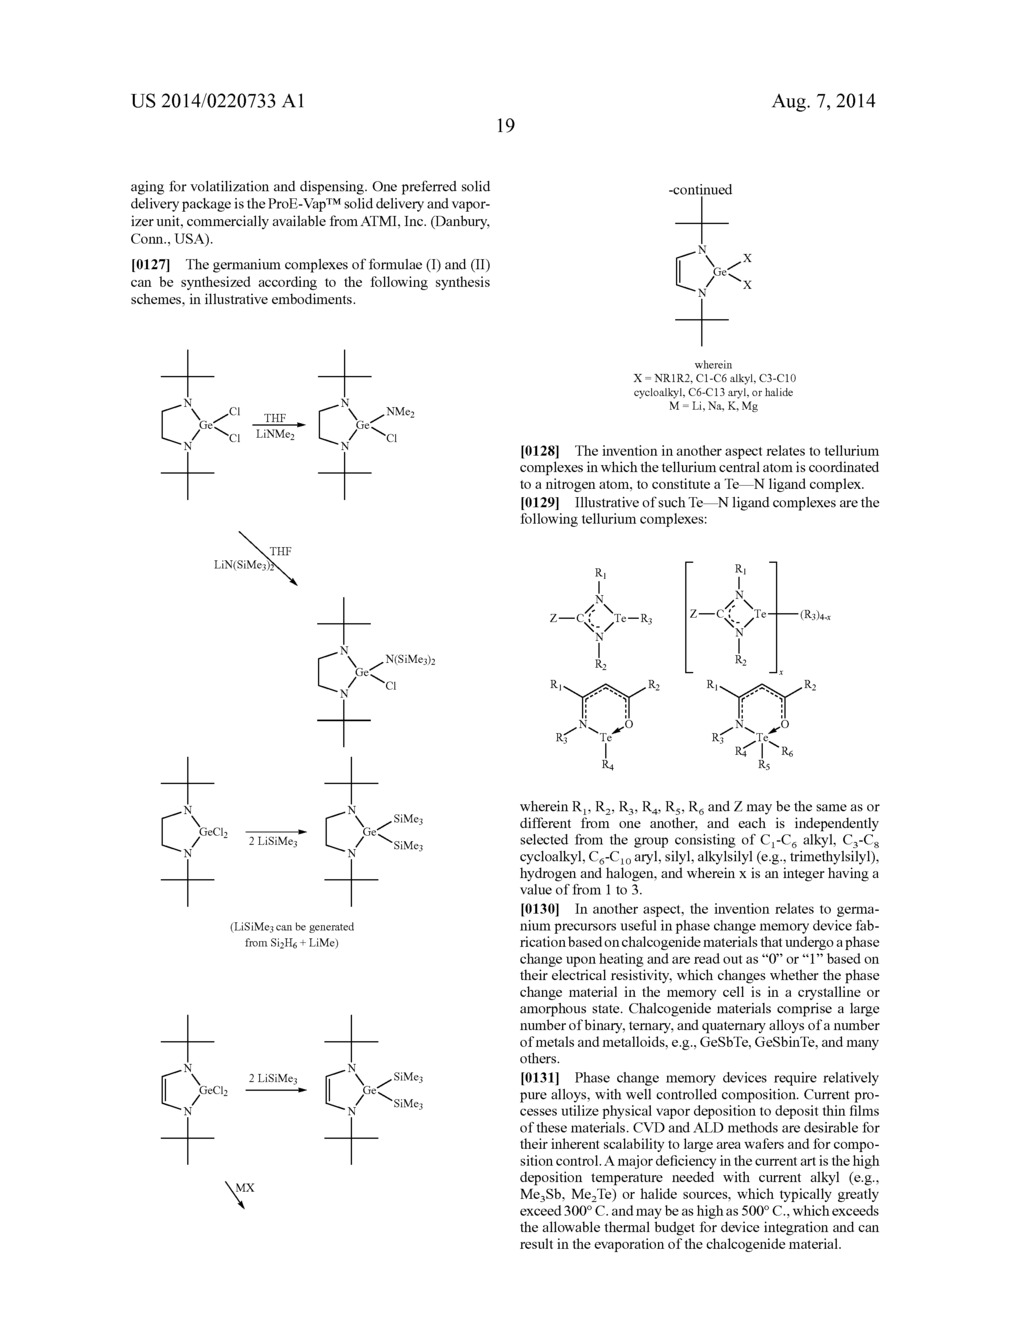 ANTIMONY AND GERMANIUM COMPLEXES USEFUL FOR CVD/ALD OF METAL THIN FILMS - diagram, schematic, and image 25